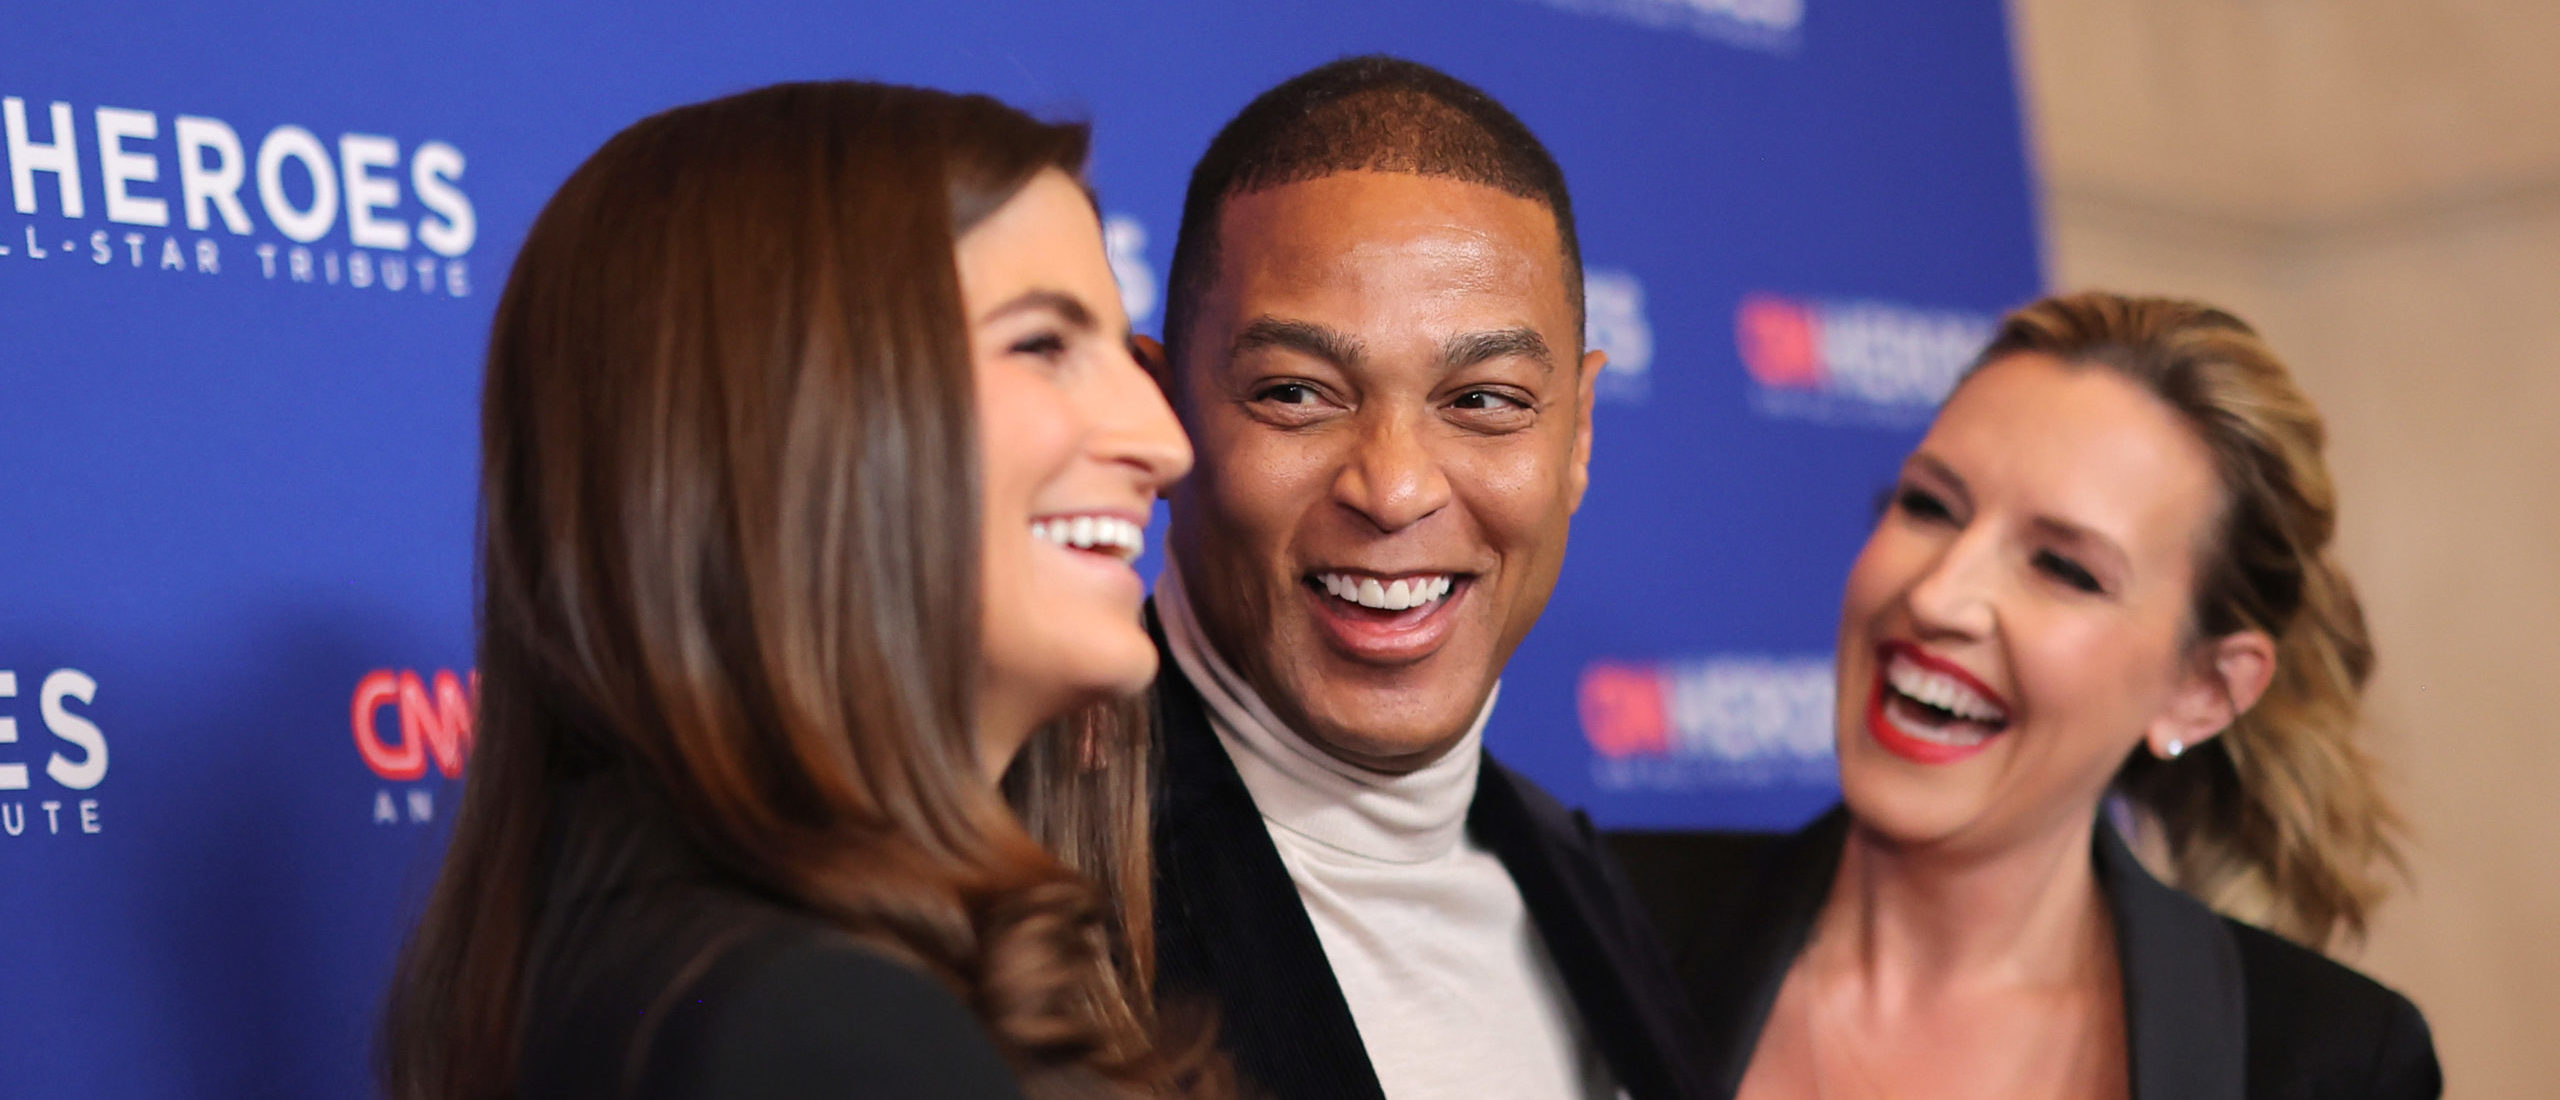 NEW YORK, NEW YORK - DECEMBER 11: (L-R) Kaitlan Collins, Don Lemon, and Poppy Harlow attend the 16th annual CNN Heroes: An All-Star Tribute at the American Museum of Natural History on December 11, 2022 in New York City. (Photo by Mike Coppola/Getty Images for CNN)